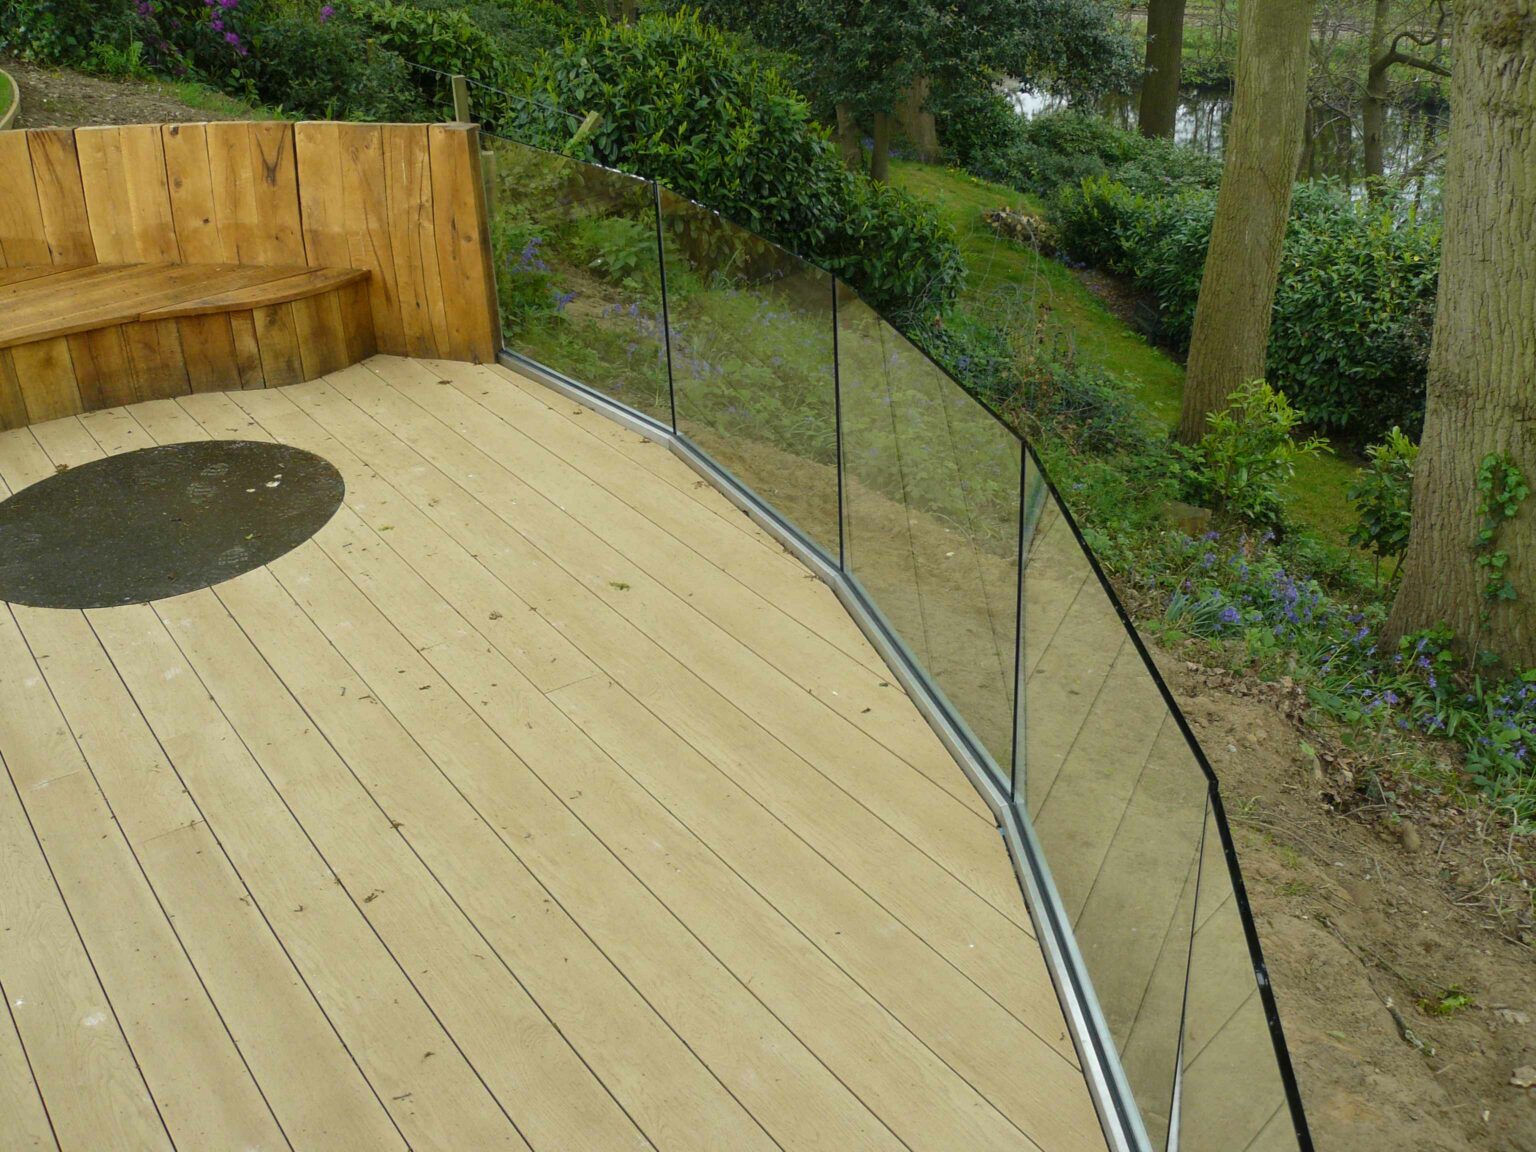 curved glass balustrade surrounding wooden decking area in garden